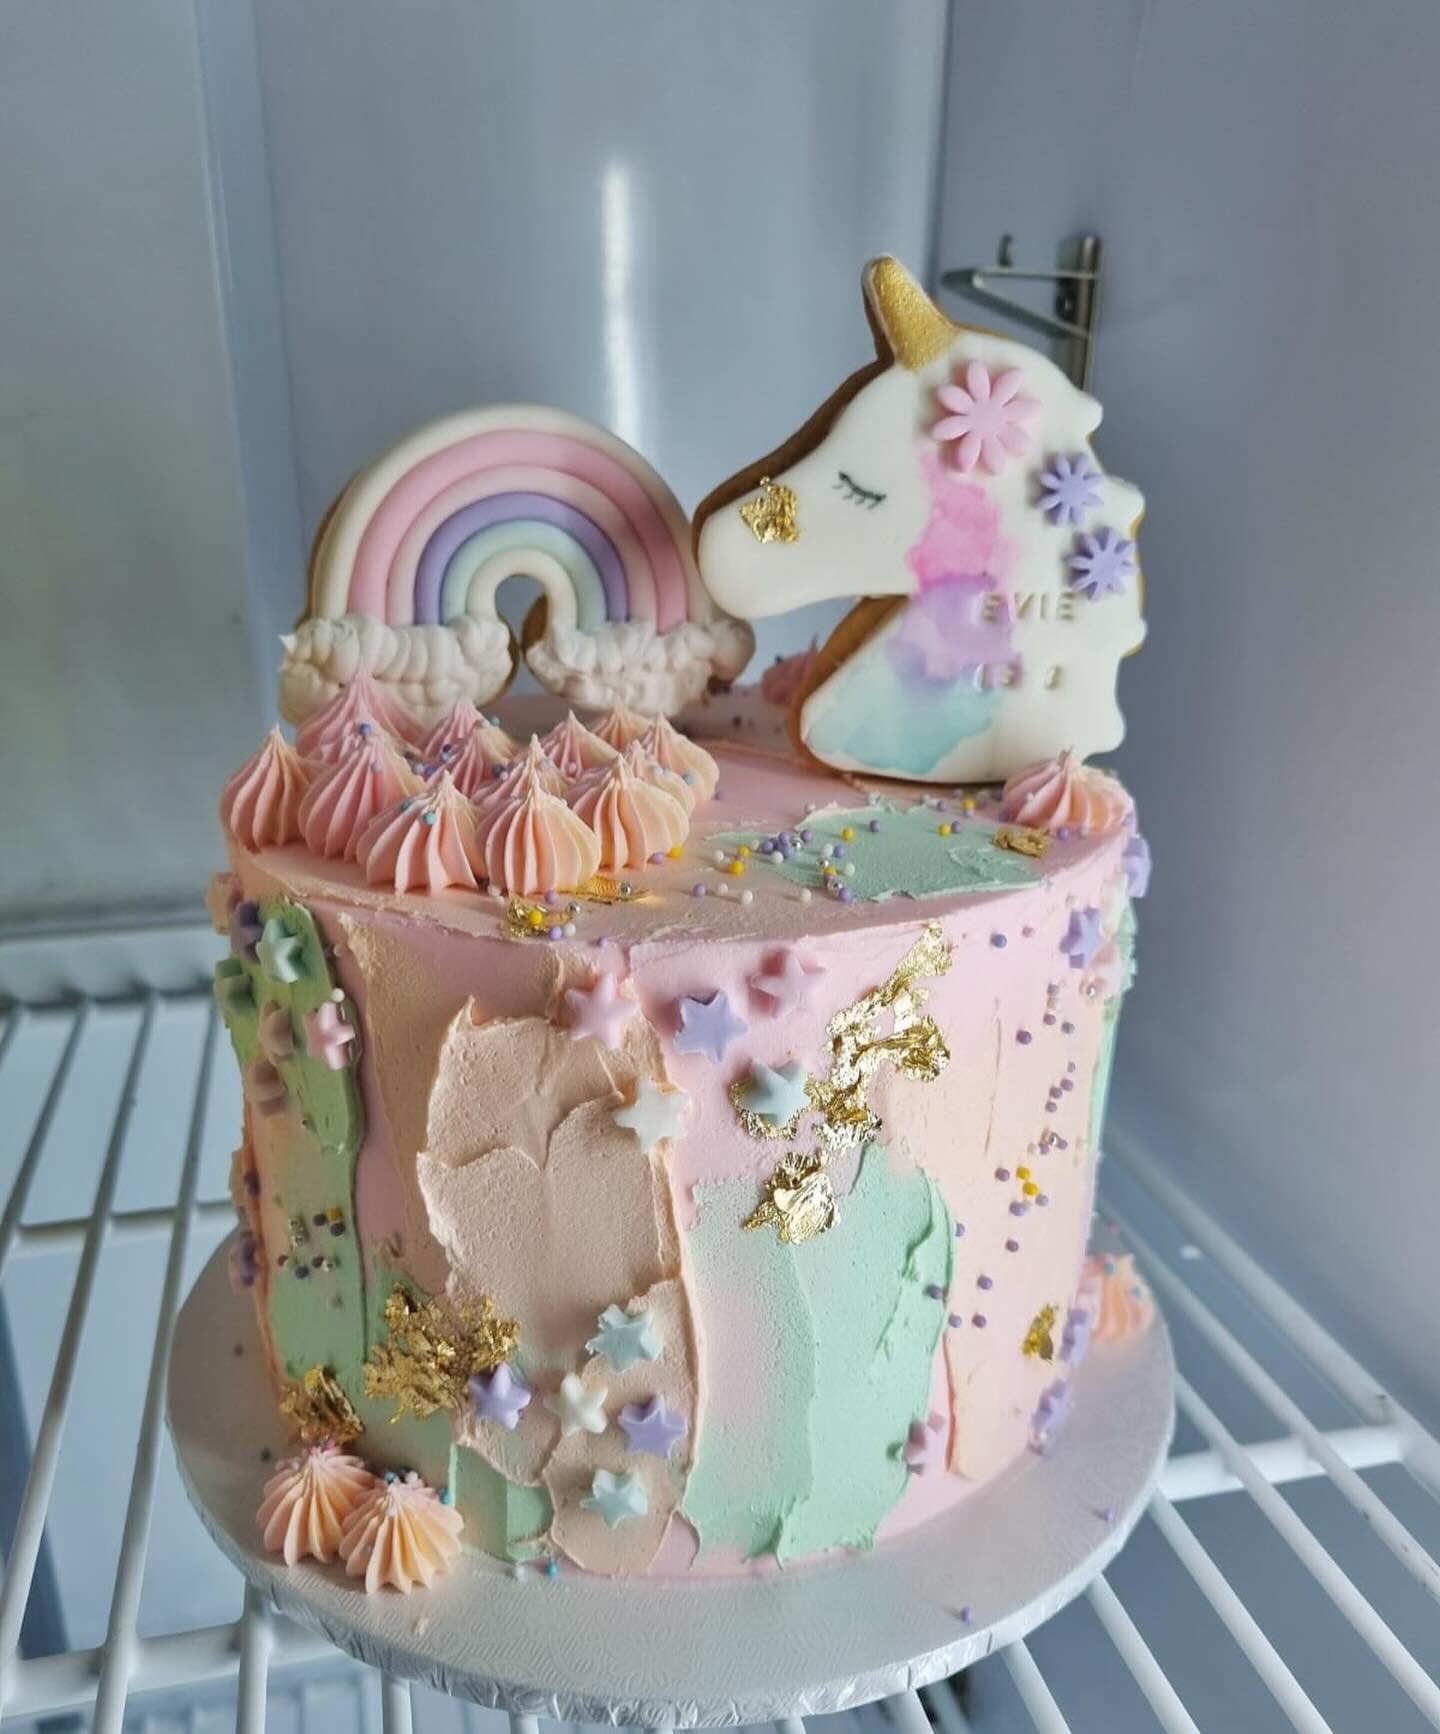 The prettiest unicorn cake you ever did see! 🦄💓🥳